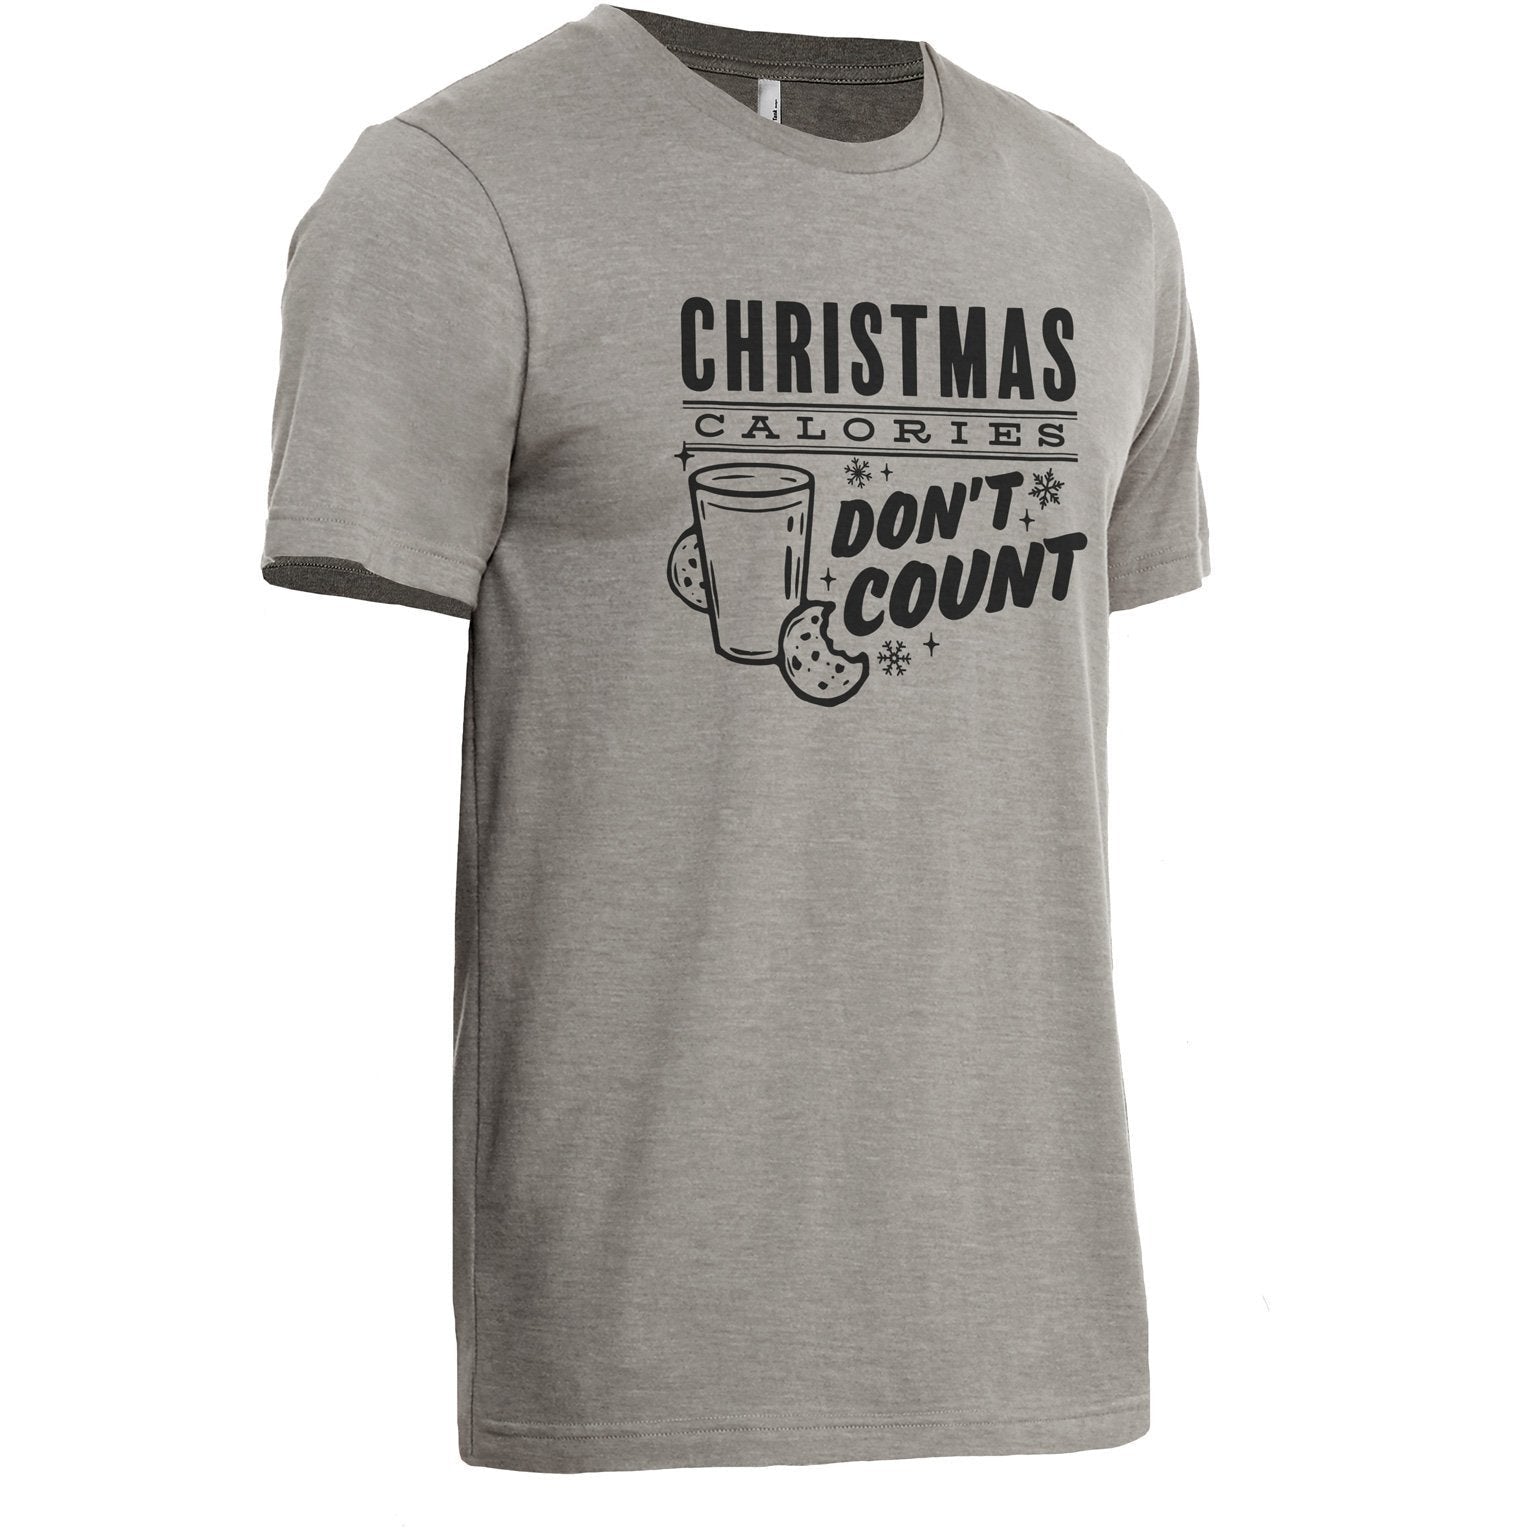 Christmas Calories Don't Count Military Grey Printed Graphic Men's Crew T-Shirt Tee Side View